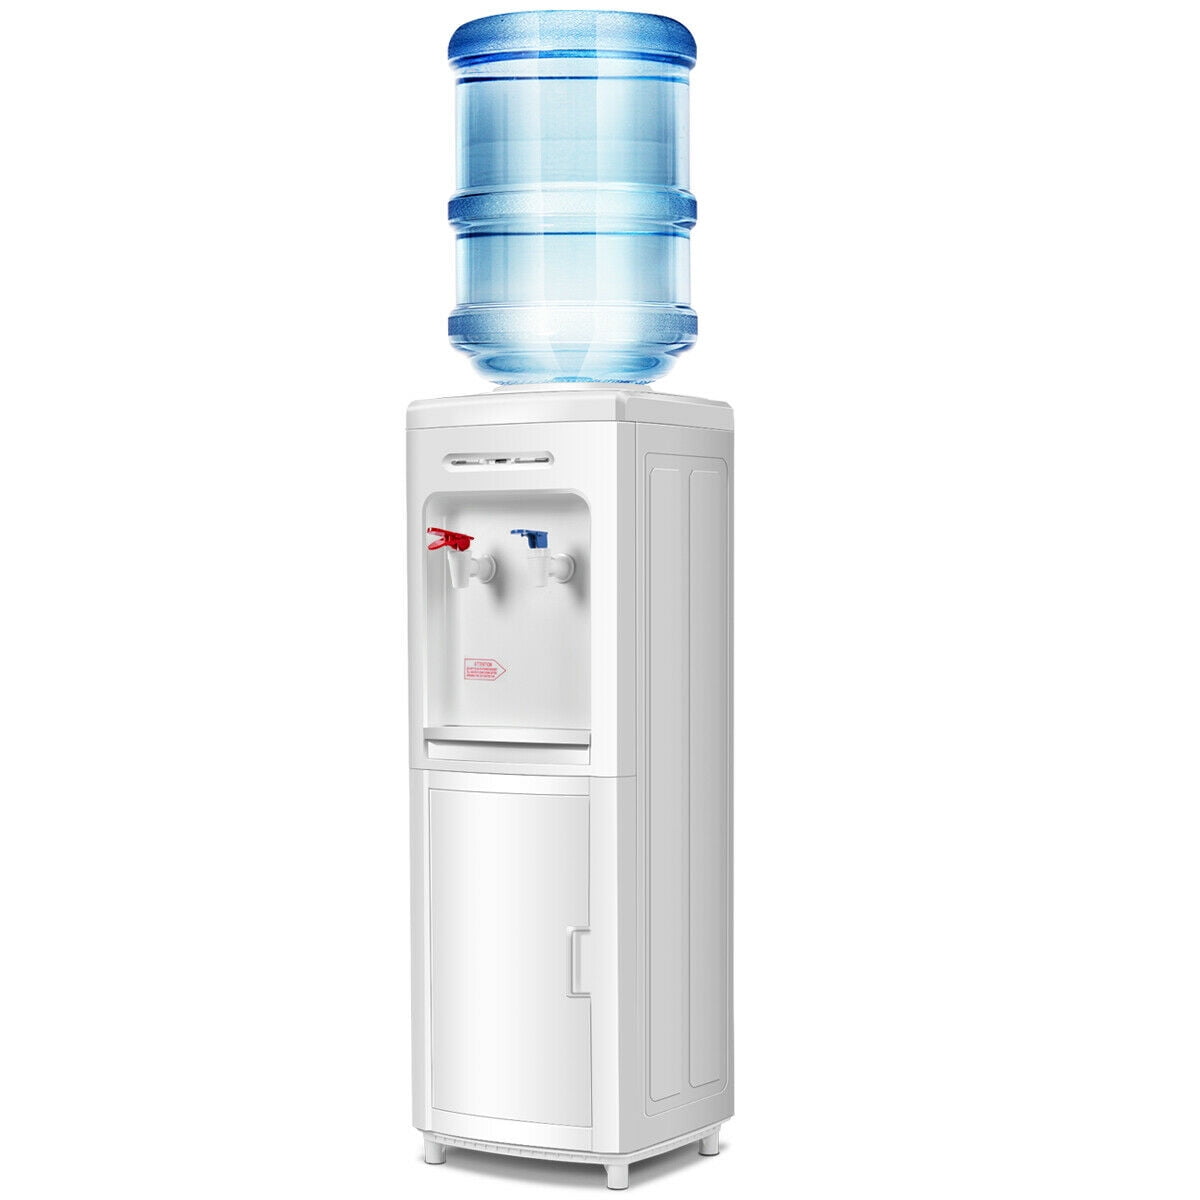 Costway Water Dispenser 5 Gallon Bottle Load Electric Primo Home